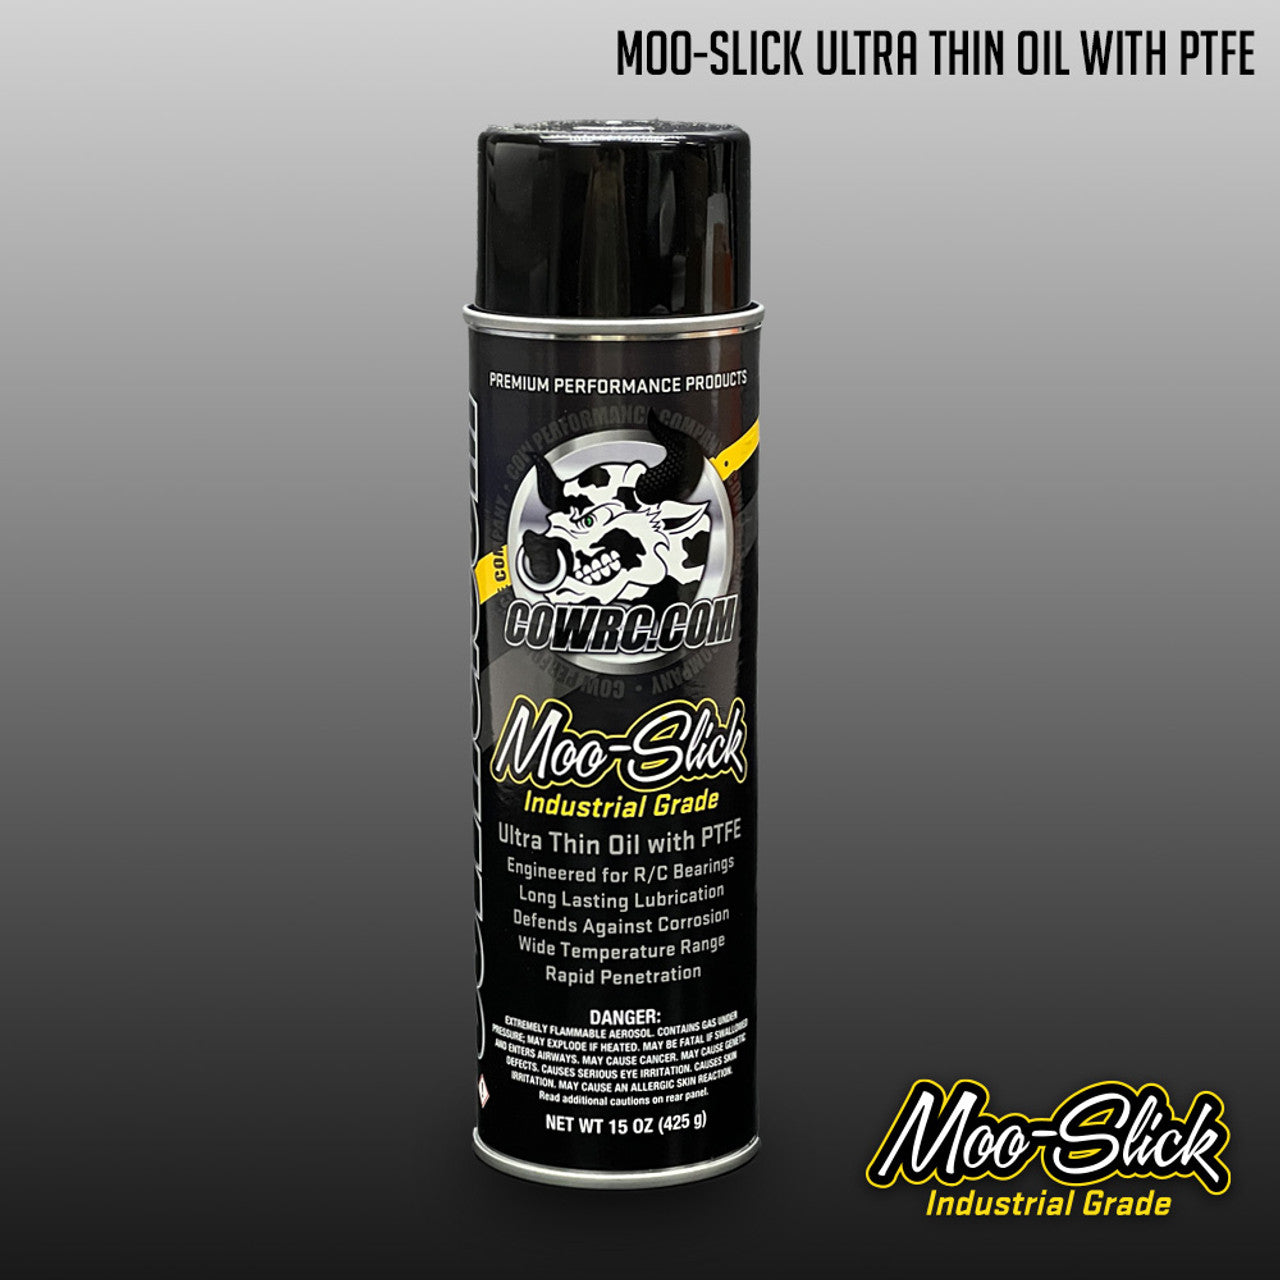 MOO-SLICK ULTRA THIN OIL with PTFE.